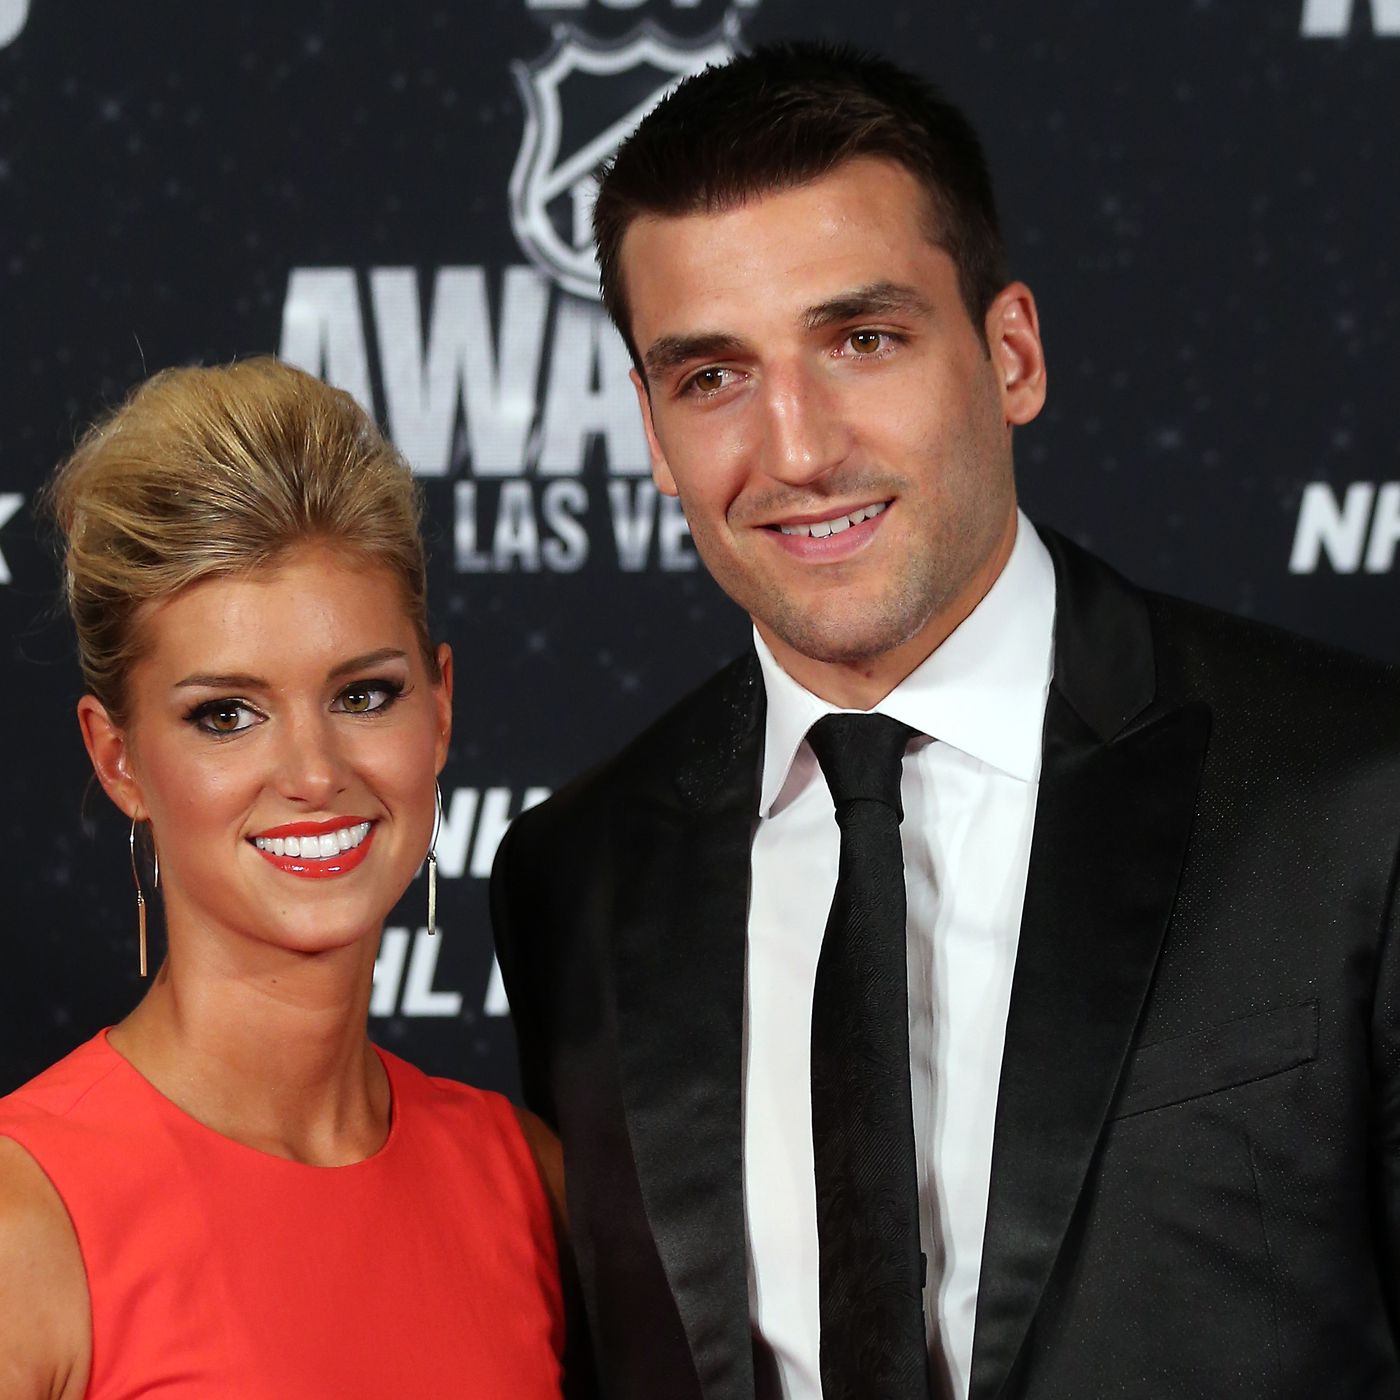 Patrice Bergeron had close ties with Donato family years before